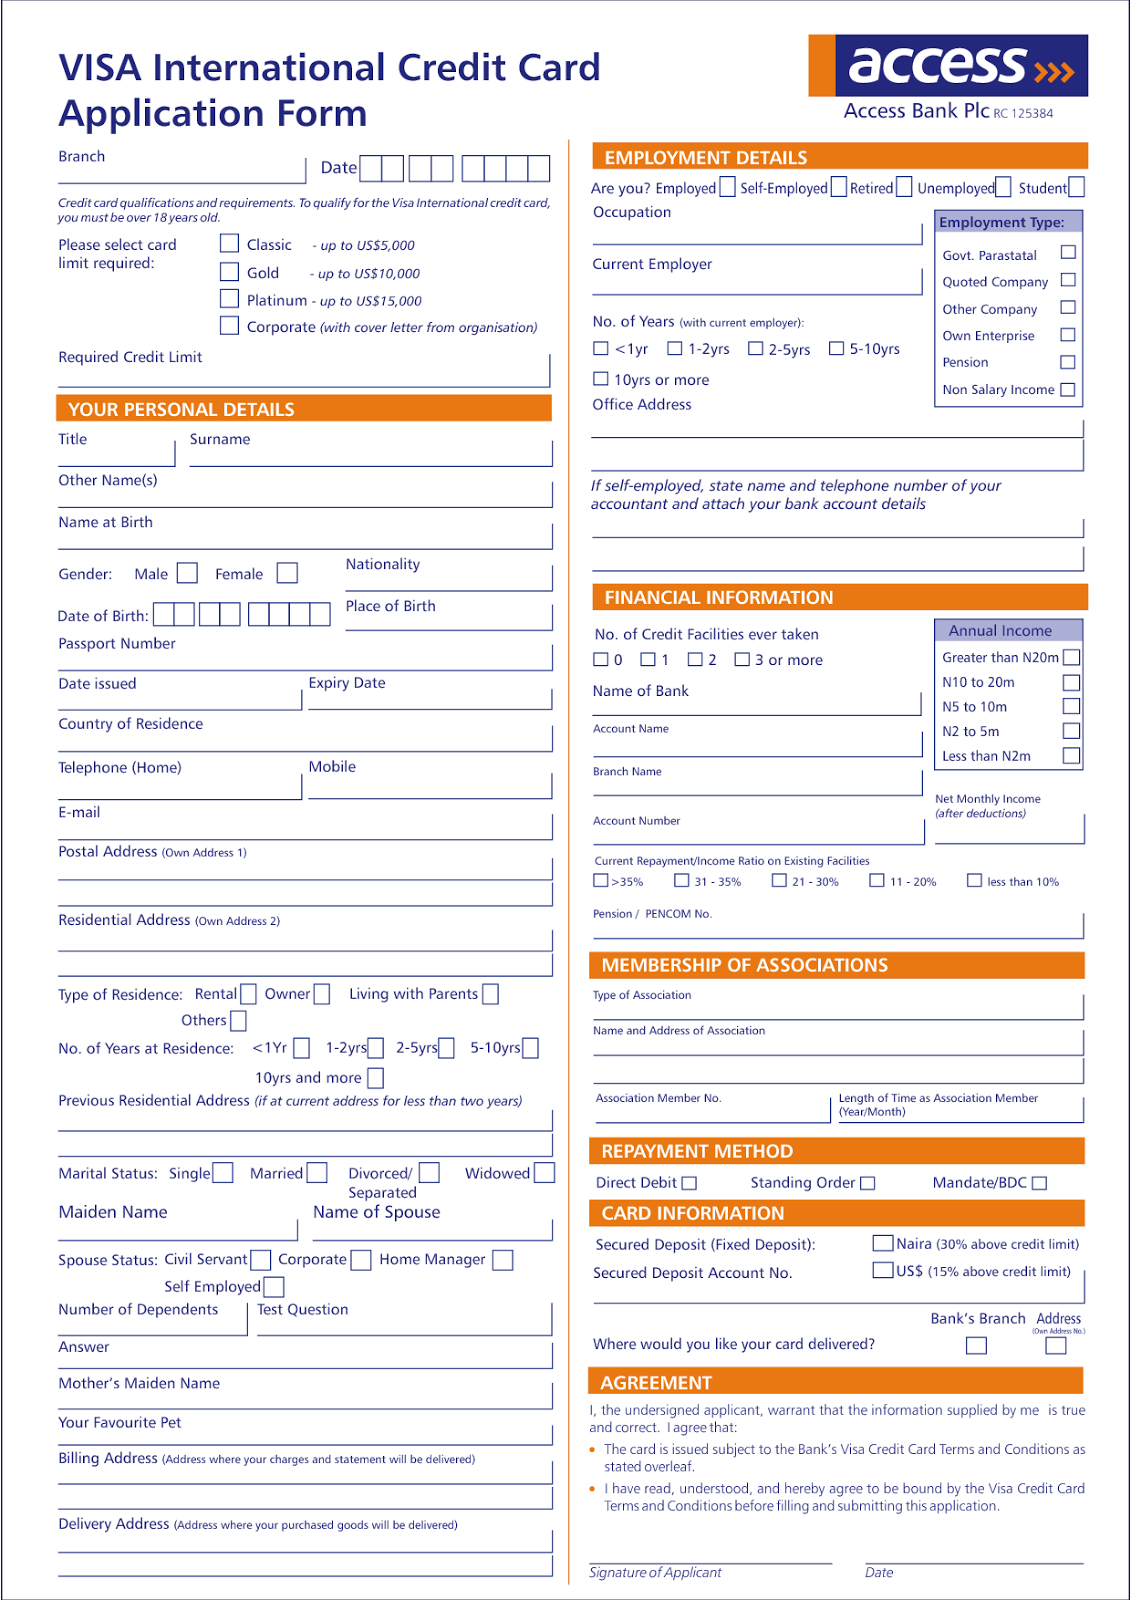 Visa Credit Card Application Form in 2013 | What News 2 Day...???